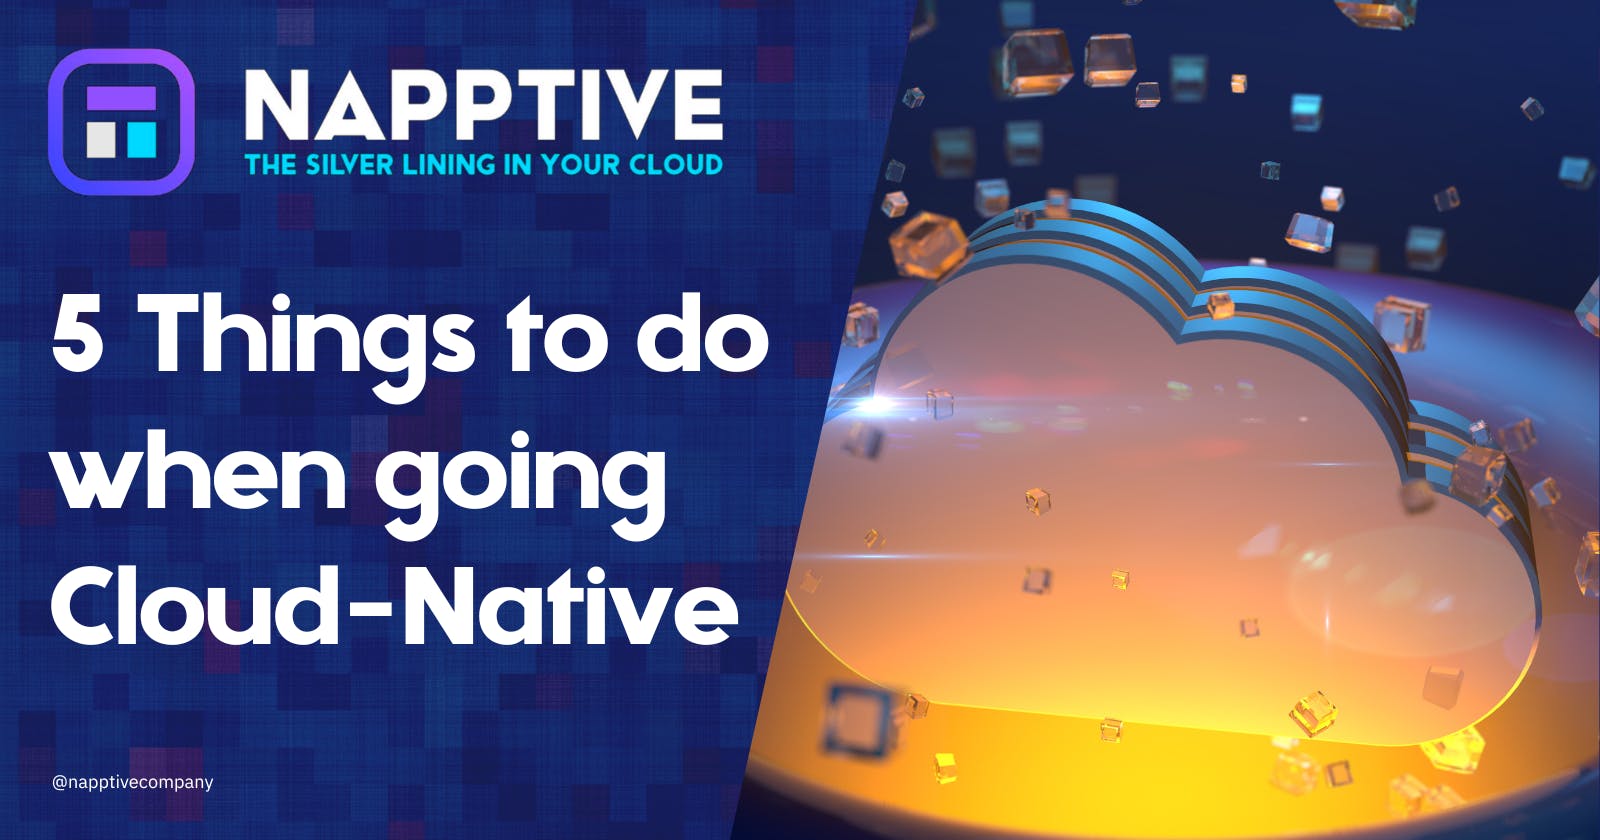 5 Things to do when going cloud-native